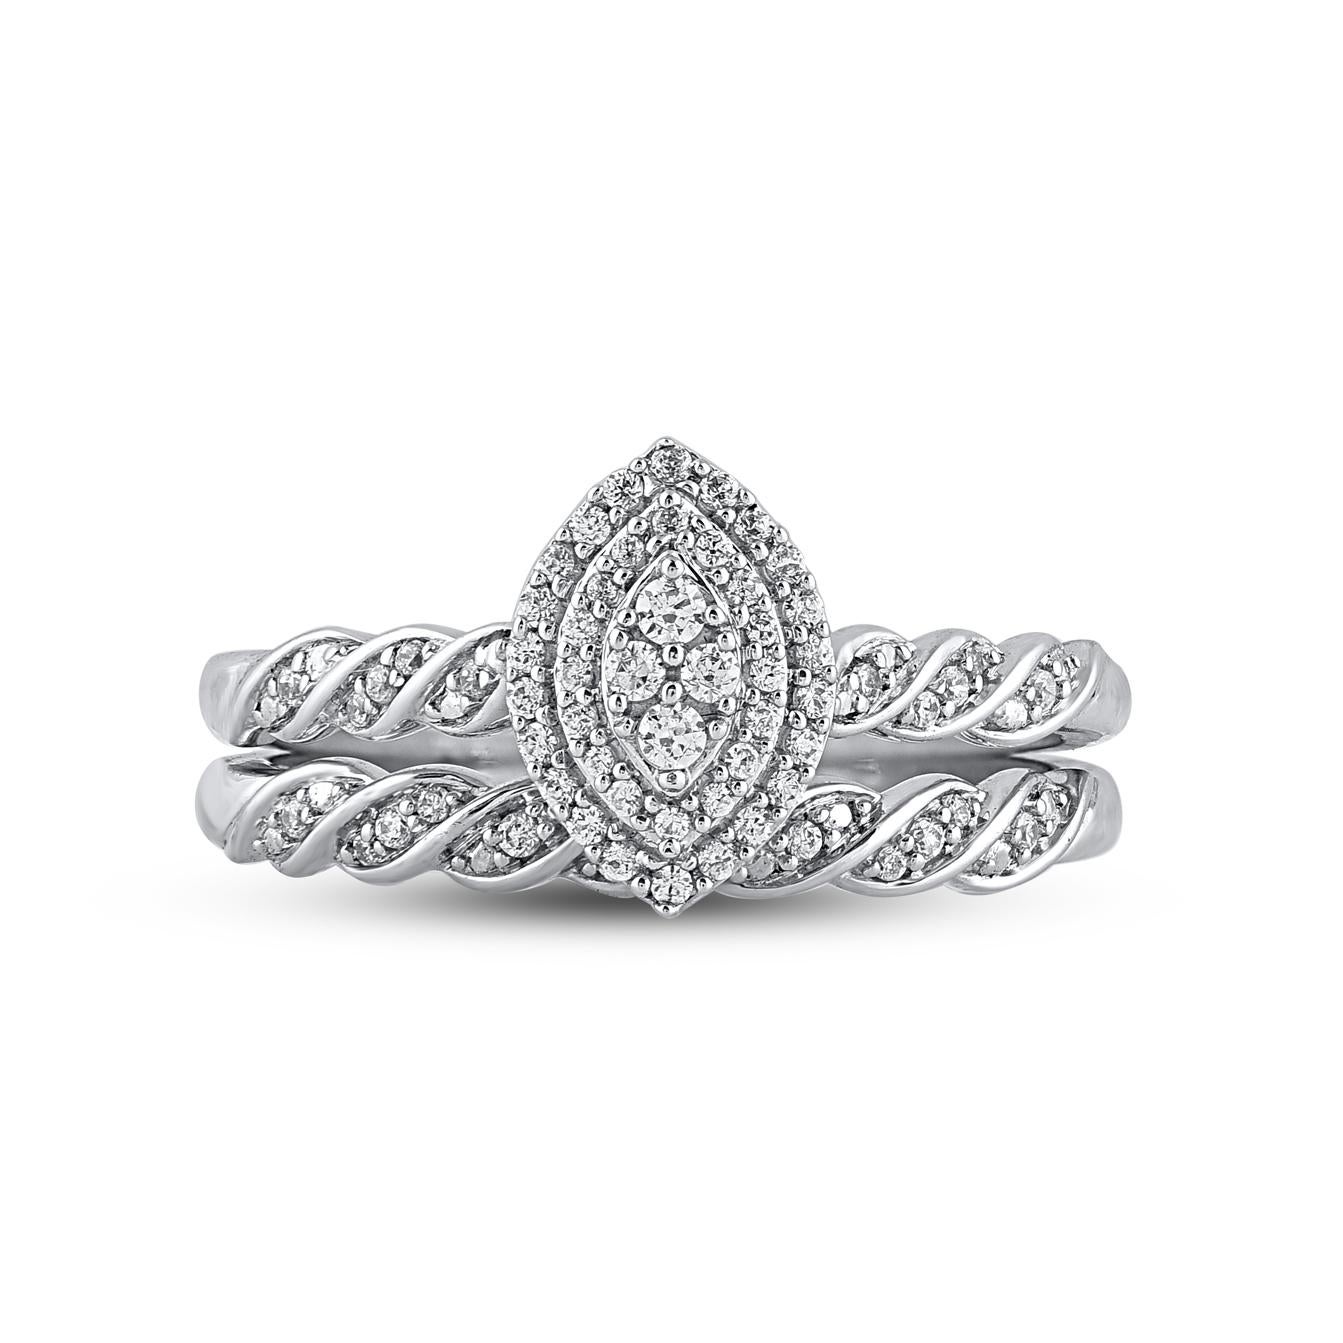 Celebrate your next steps in life and love with this marquise shape diamond ring set. Crafted in 14 Karat white gold. This wedding ring features a sparkling 65 brilliant cut and single cut round diamond beautifully set in prong & pave setting. The